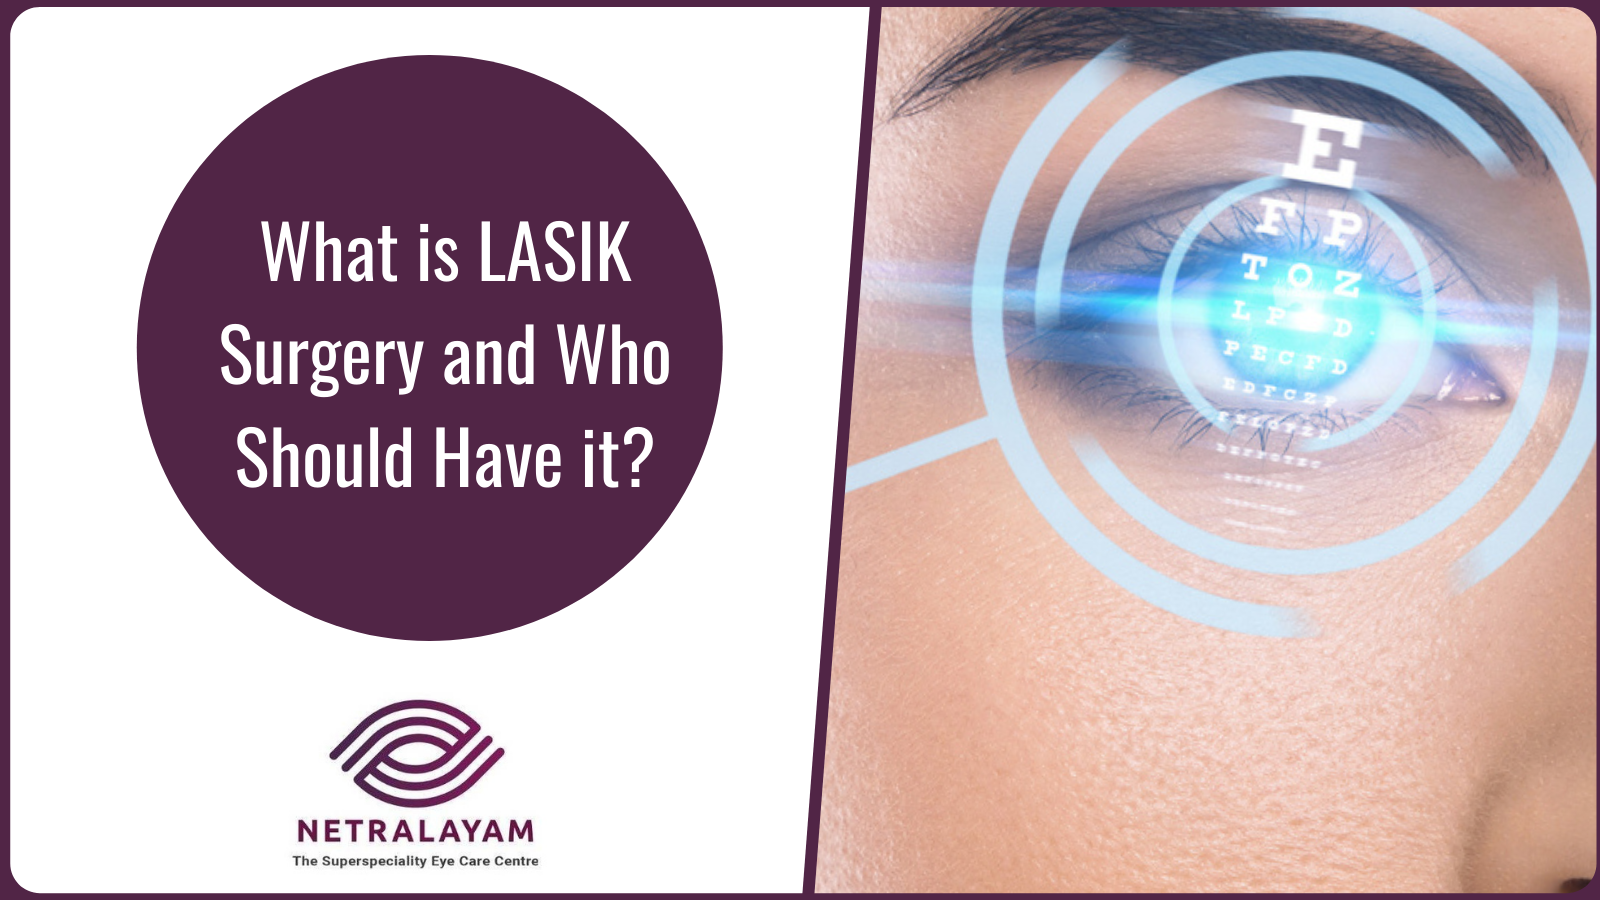 What is LASIK Surgery and Who Should Have it?